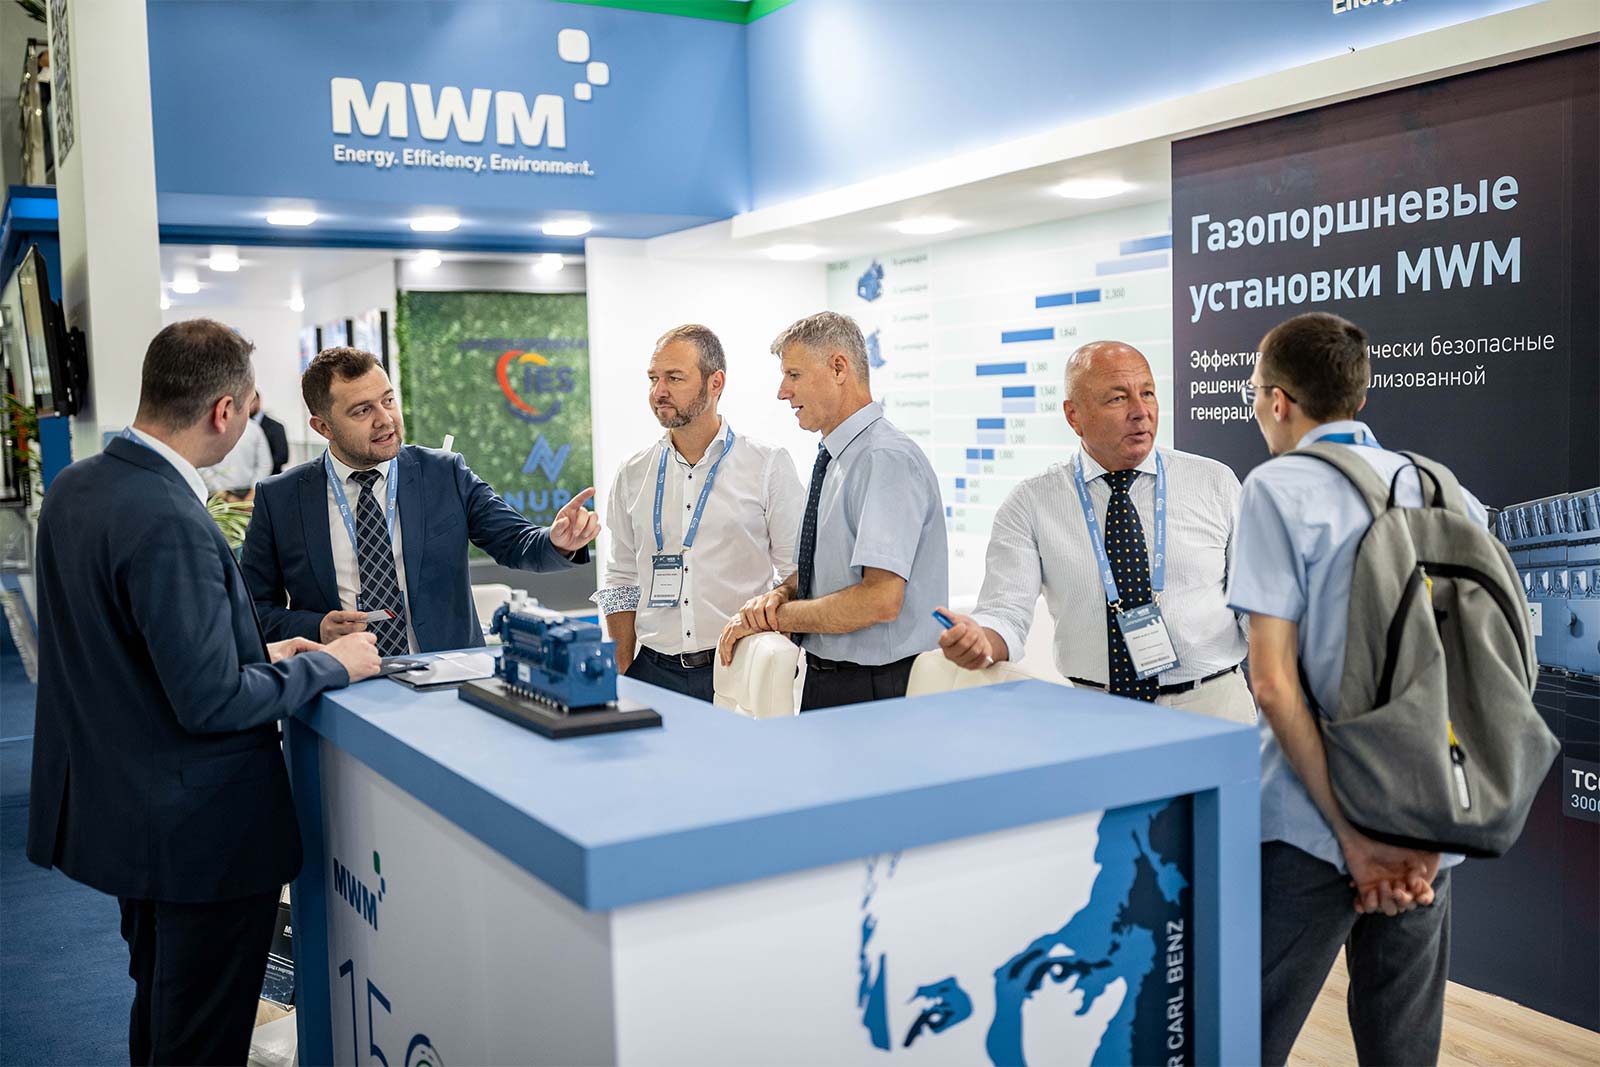 Close cooperation: İltekno and MWM jointly answer questions of the visitors of the MWM booth at the Power Uzbekistan 2023 trade fair, which took place in the capital Tashkent in May. (Photograph: Provided by Iteca)